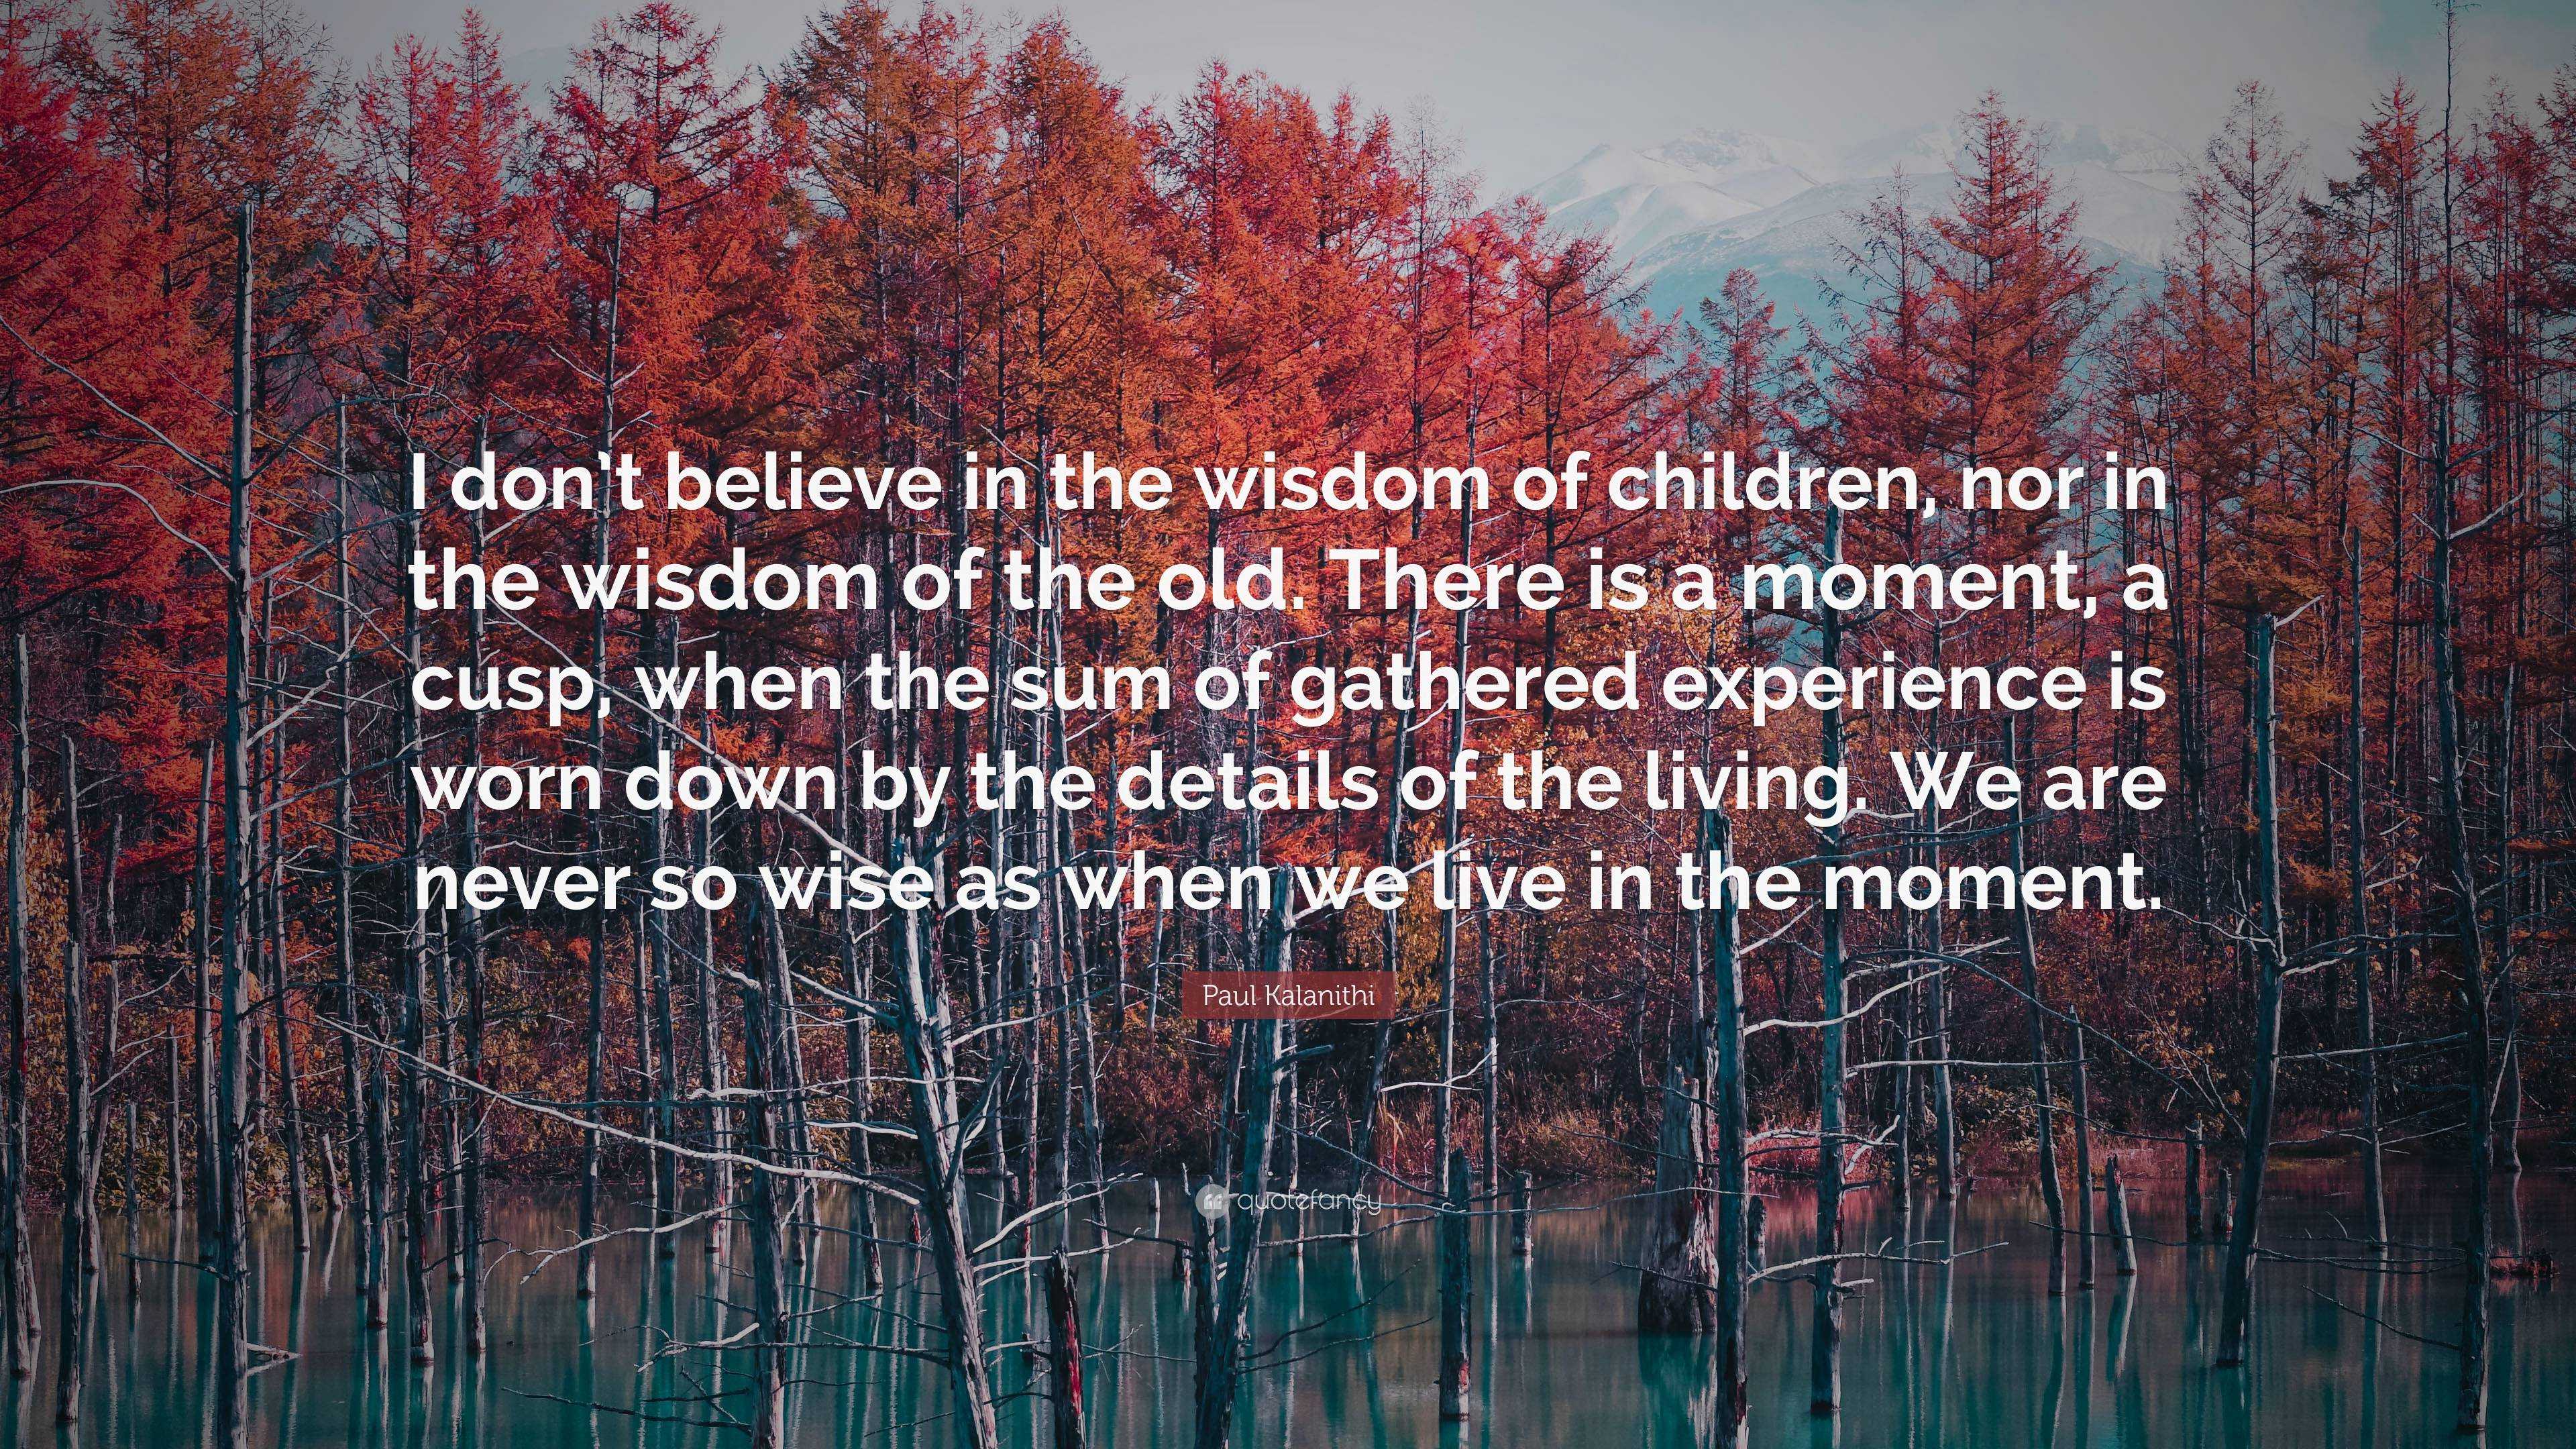 Paul Kalanithi Quote: “I don’t believe in the wisdom of children, nor